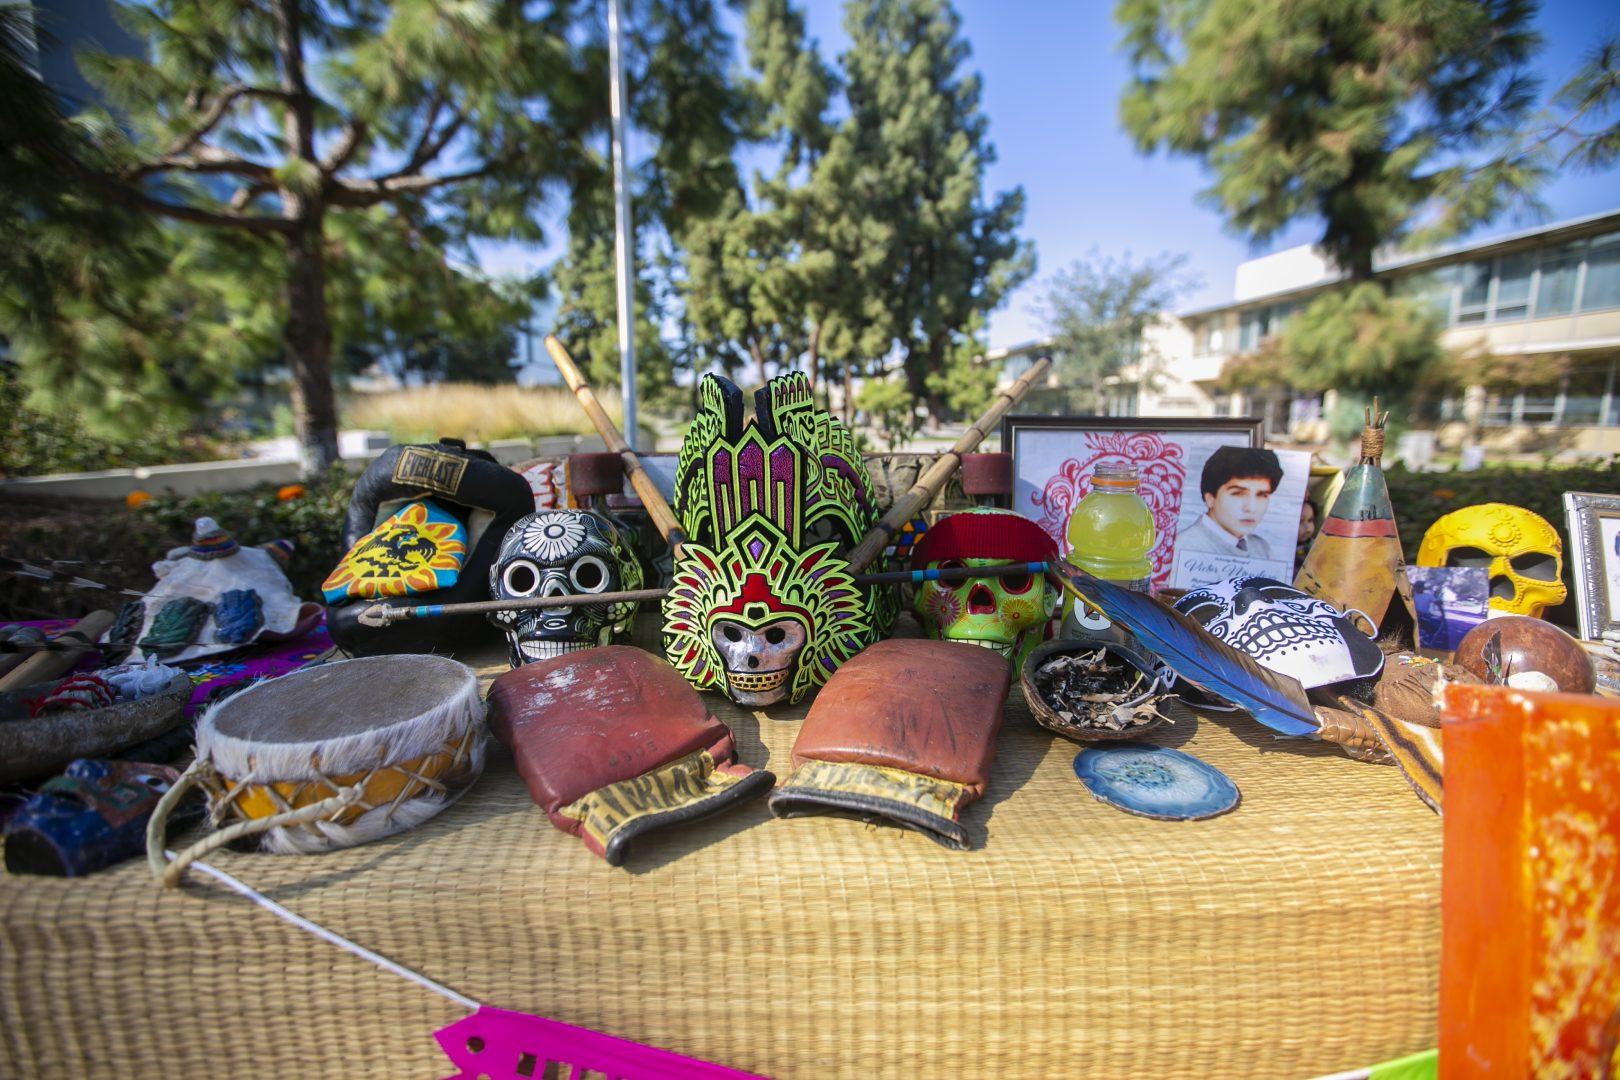 An altar was made with decorations and personal mementos for the DÃ­a de los Muertos celebration to remember the dead near the free speech area on Saturday, Nov. 2, 2019. (Larry Valenzuela/The Collegian)